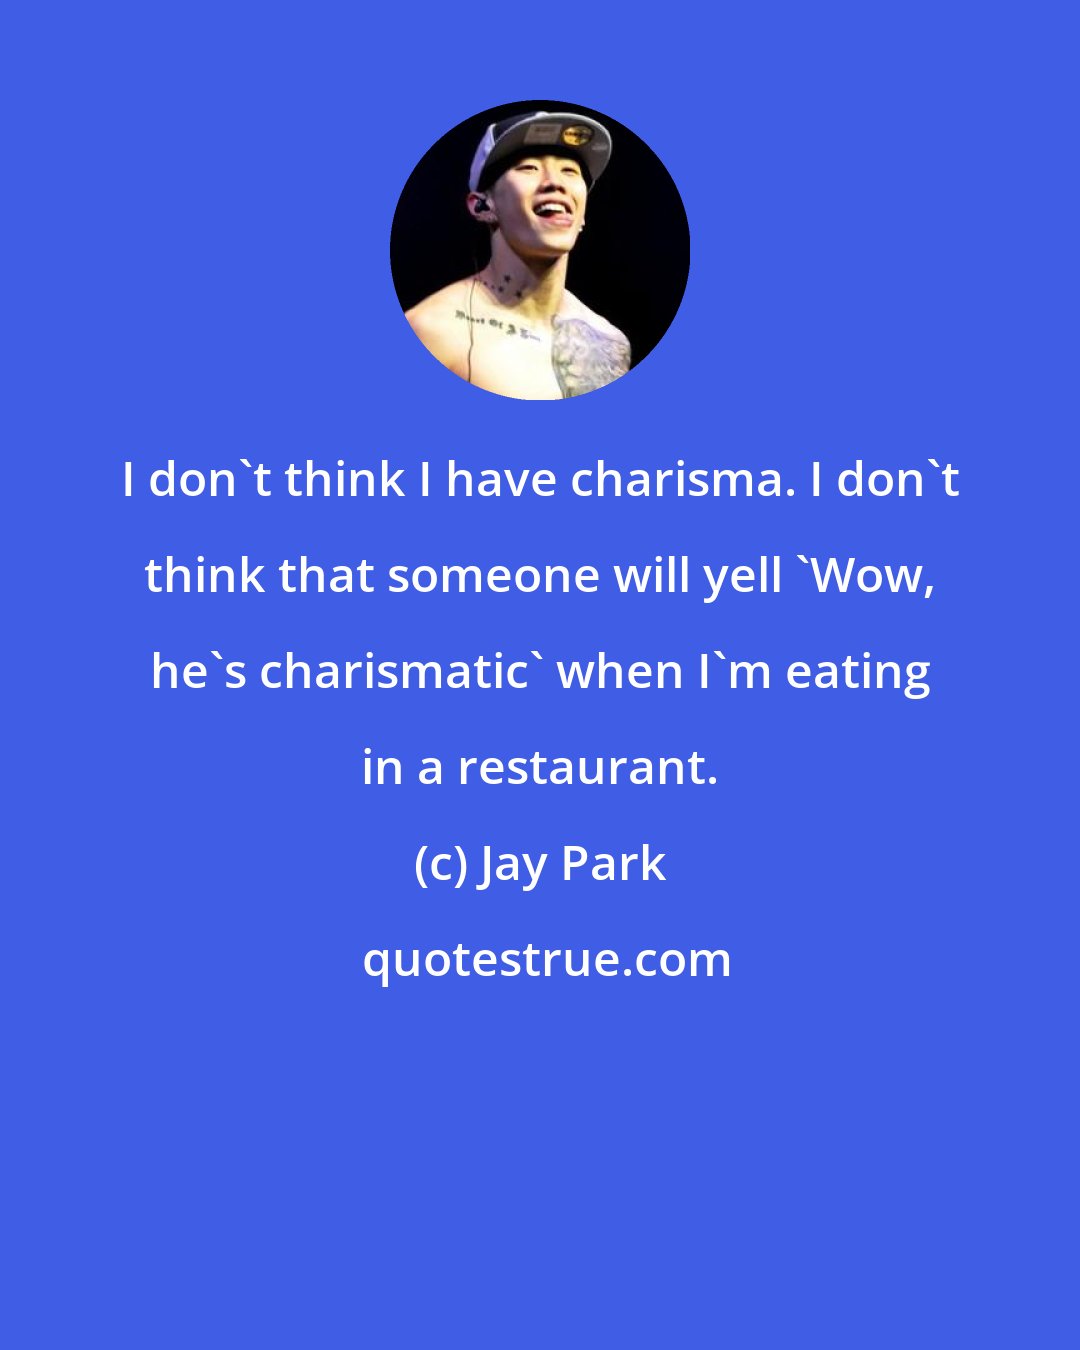 Jay Park: I don't think I have charisma. I don't think that someone will yell 'Wow, he's charismatic' when I'm eating in a restaurant.